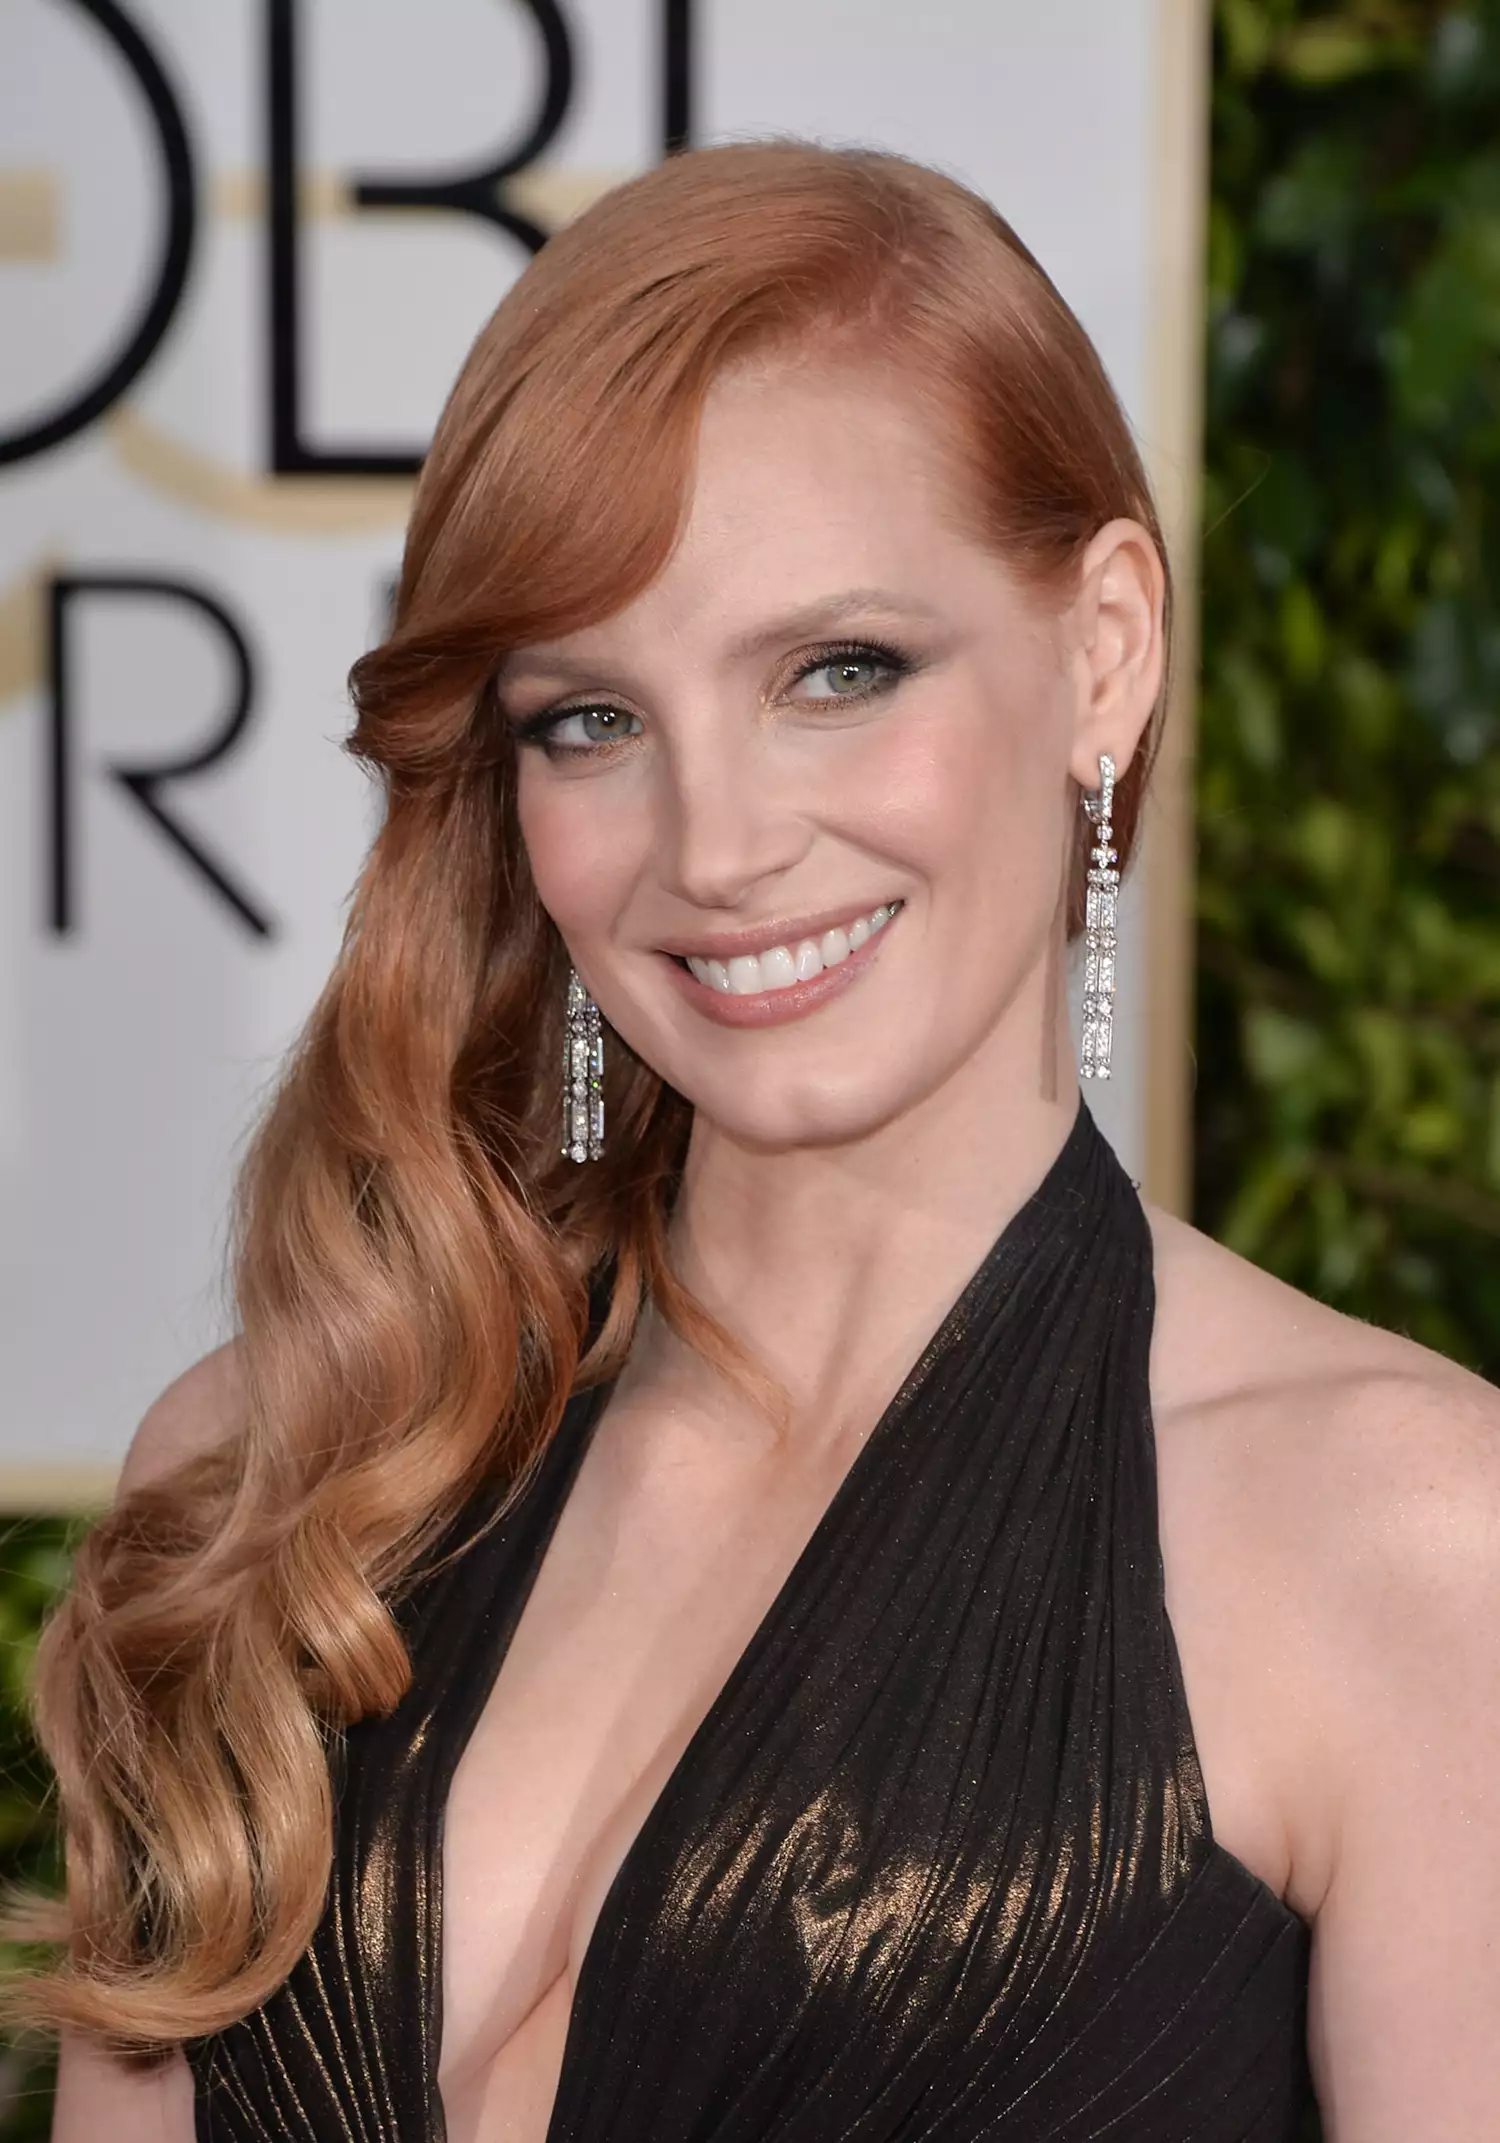 Jessica Chastain in bronze makeup